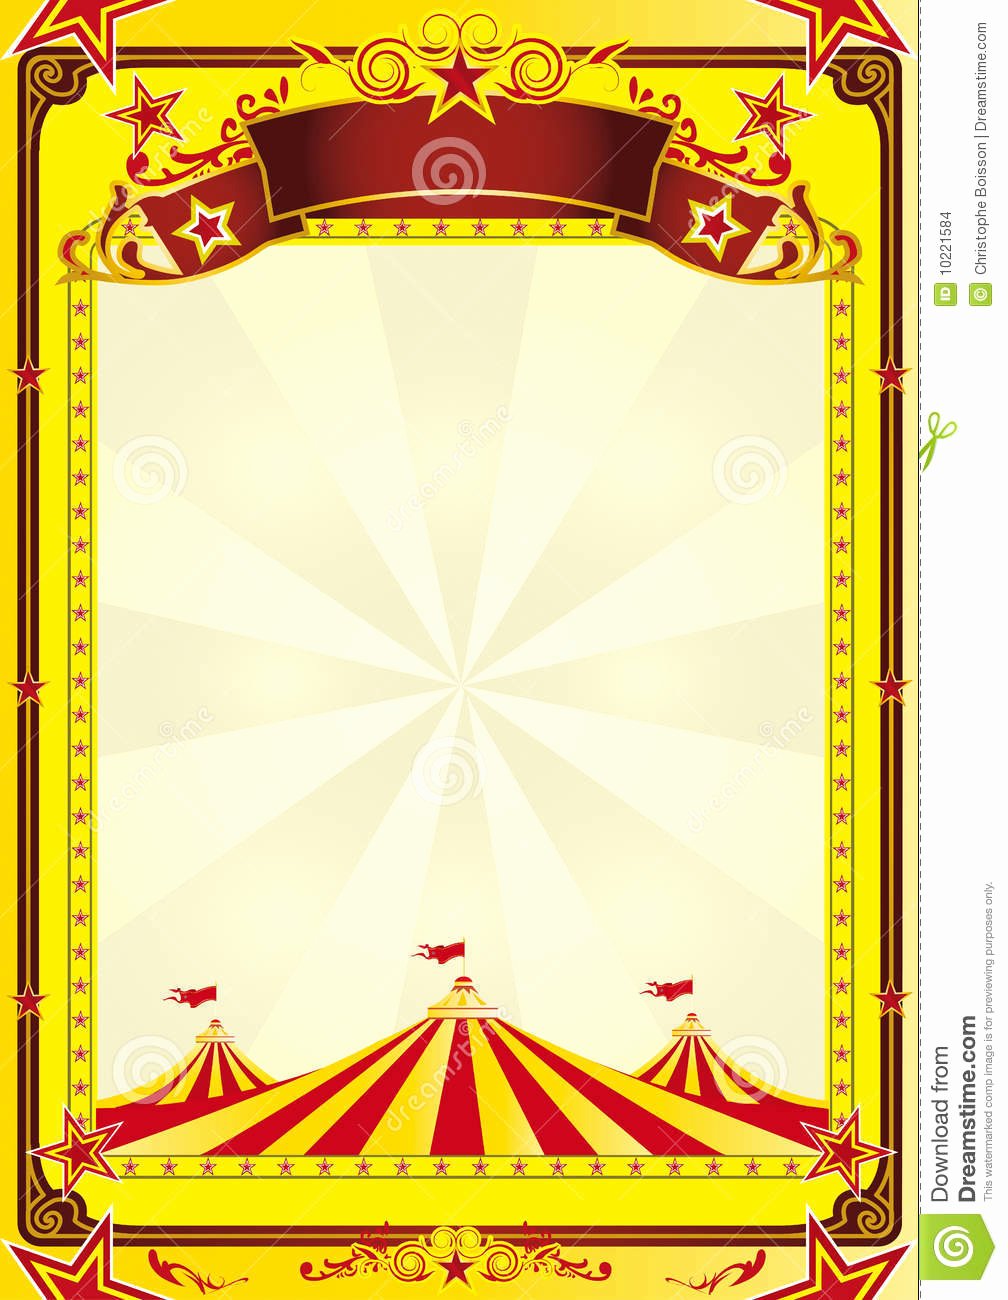 Circus Poster Template Free Download Awesome Big top Circus Flyer Stock Vector Illustration Of School